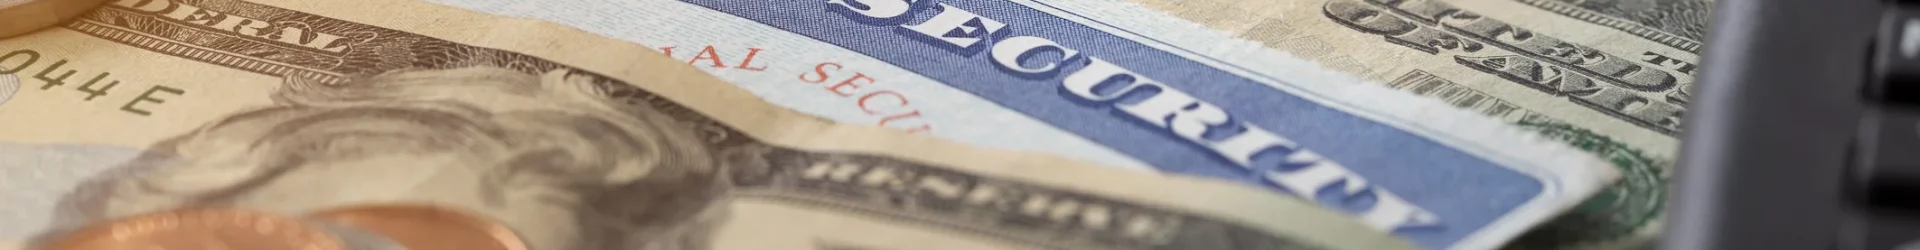 money saved from reducing social security taxes